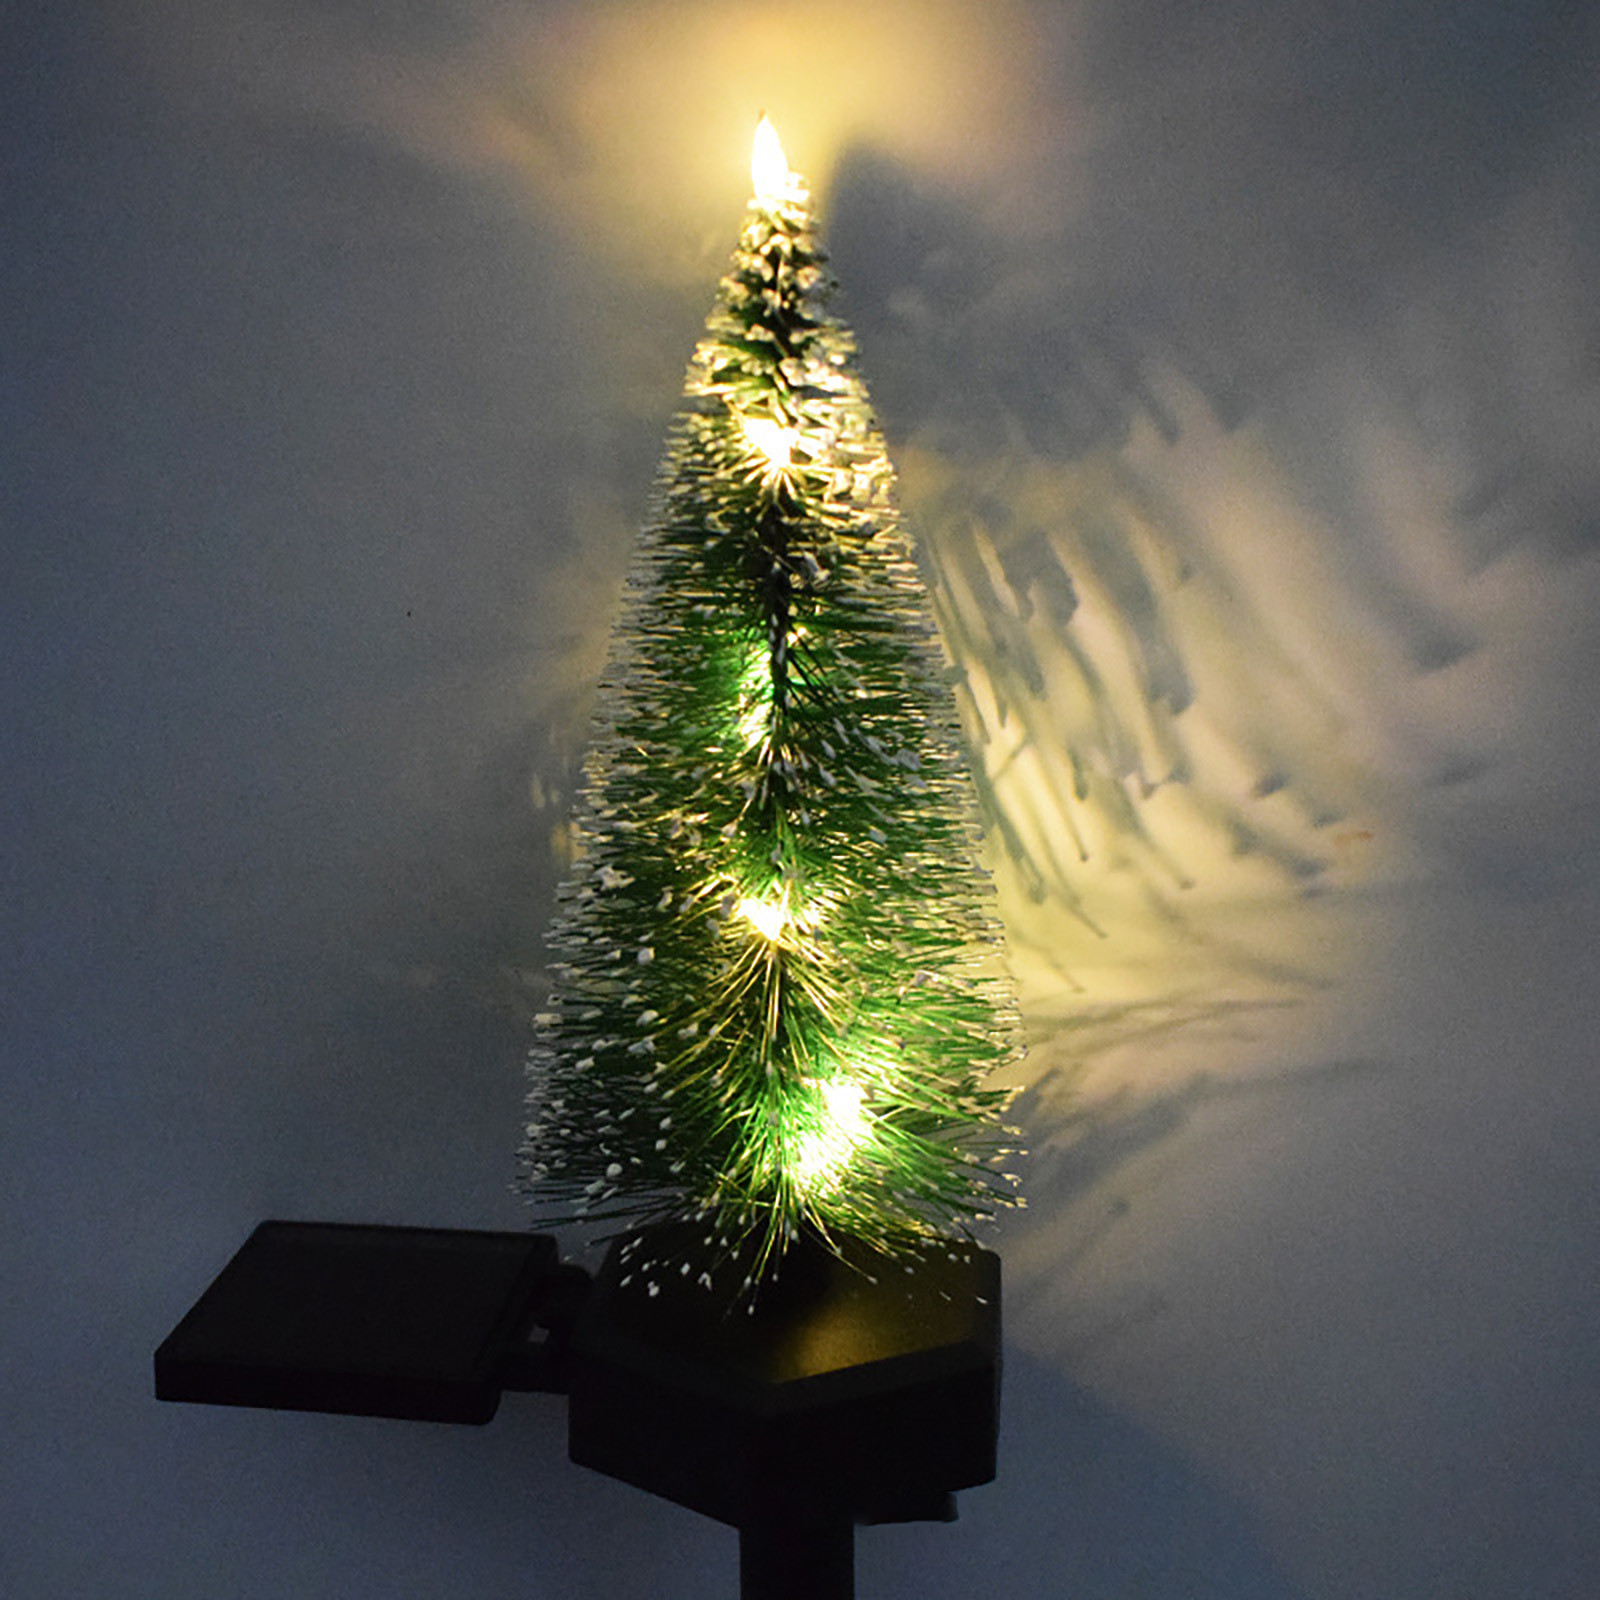 Christmas-Tree-Lights-Led-Solar-Light-For-Garden-Decoration-Lawn-Lamp-Outdoor-Home-Pathway-Bulb-Wate-1918433-12